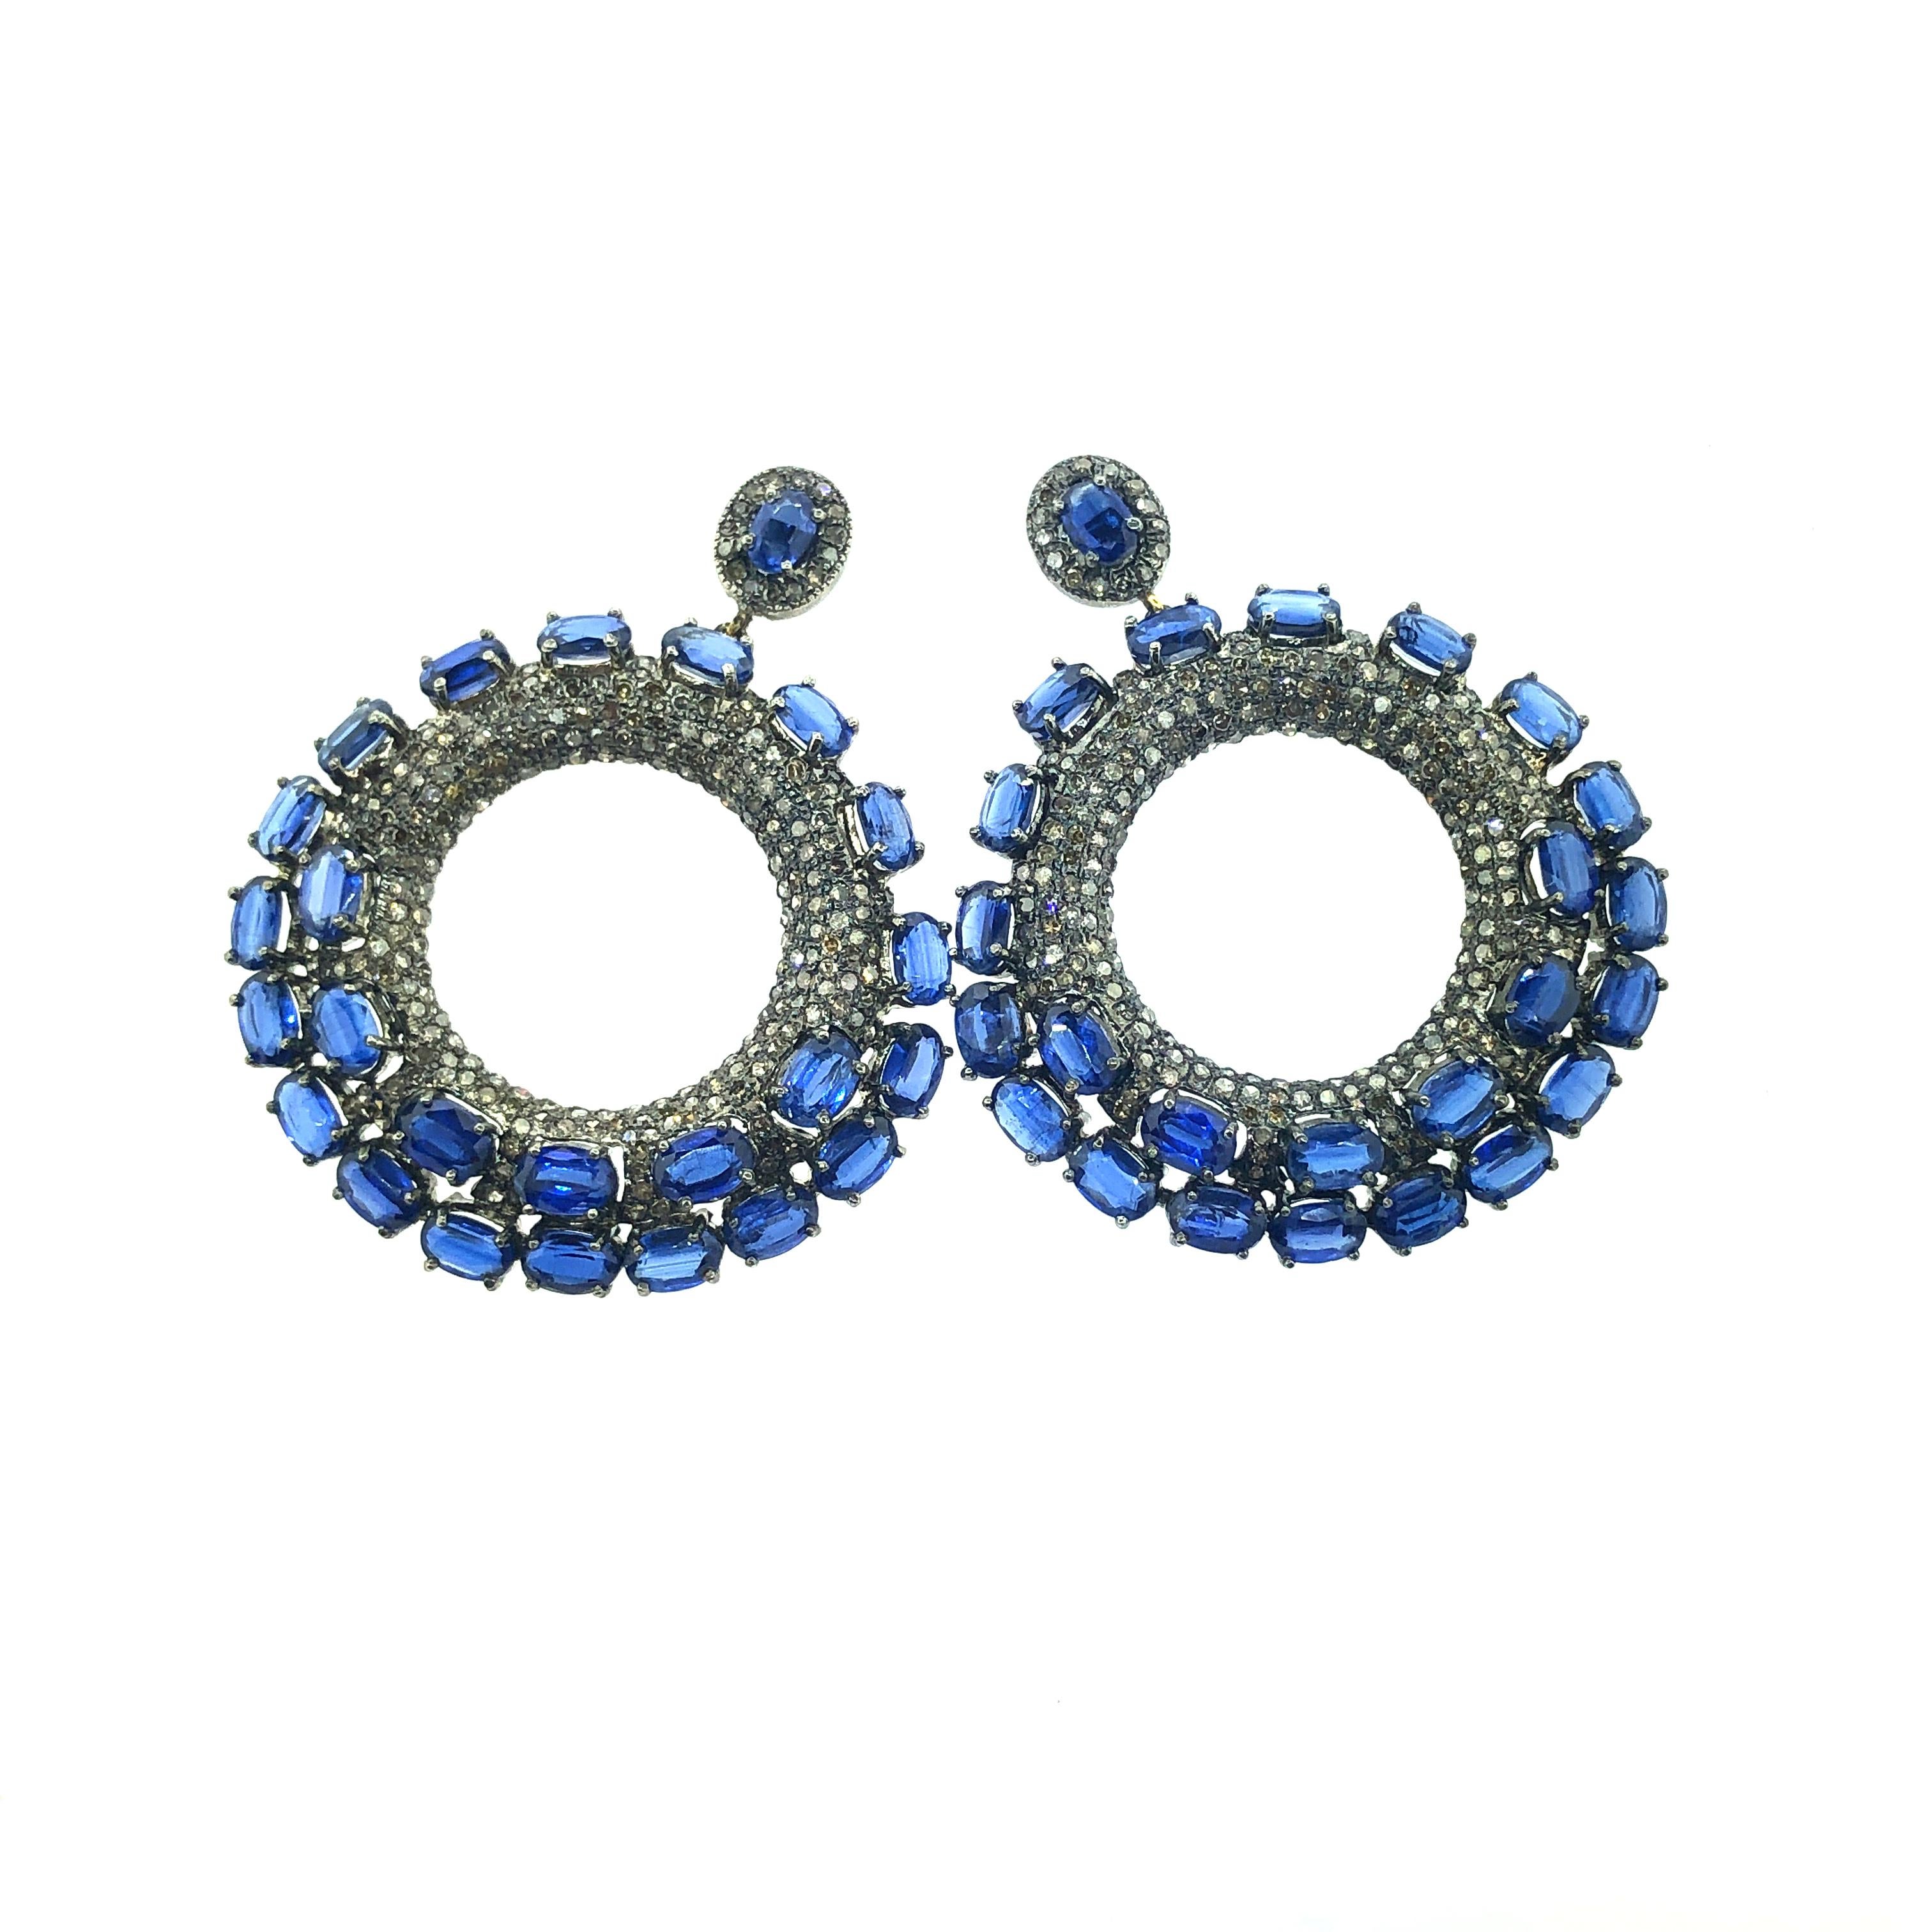 31.66 ct Kyanite Earrings set in Oxidized Sterling Silver with 14KT Gold posts and 4.80 ct Champagne Diamonds are made with real natural stones. The blue color of the Kyanite stone is deep and looks juts like the color of sapphire.  Each stone is